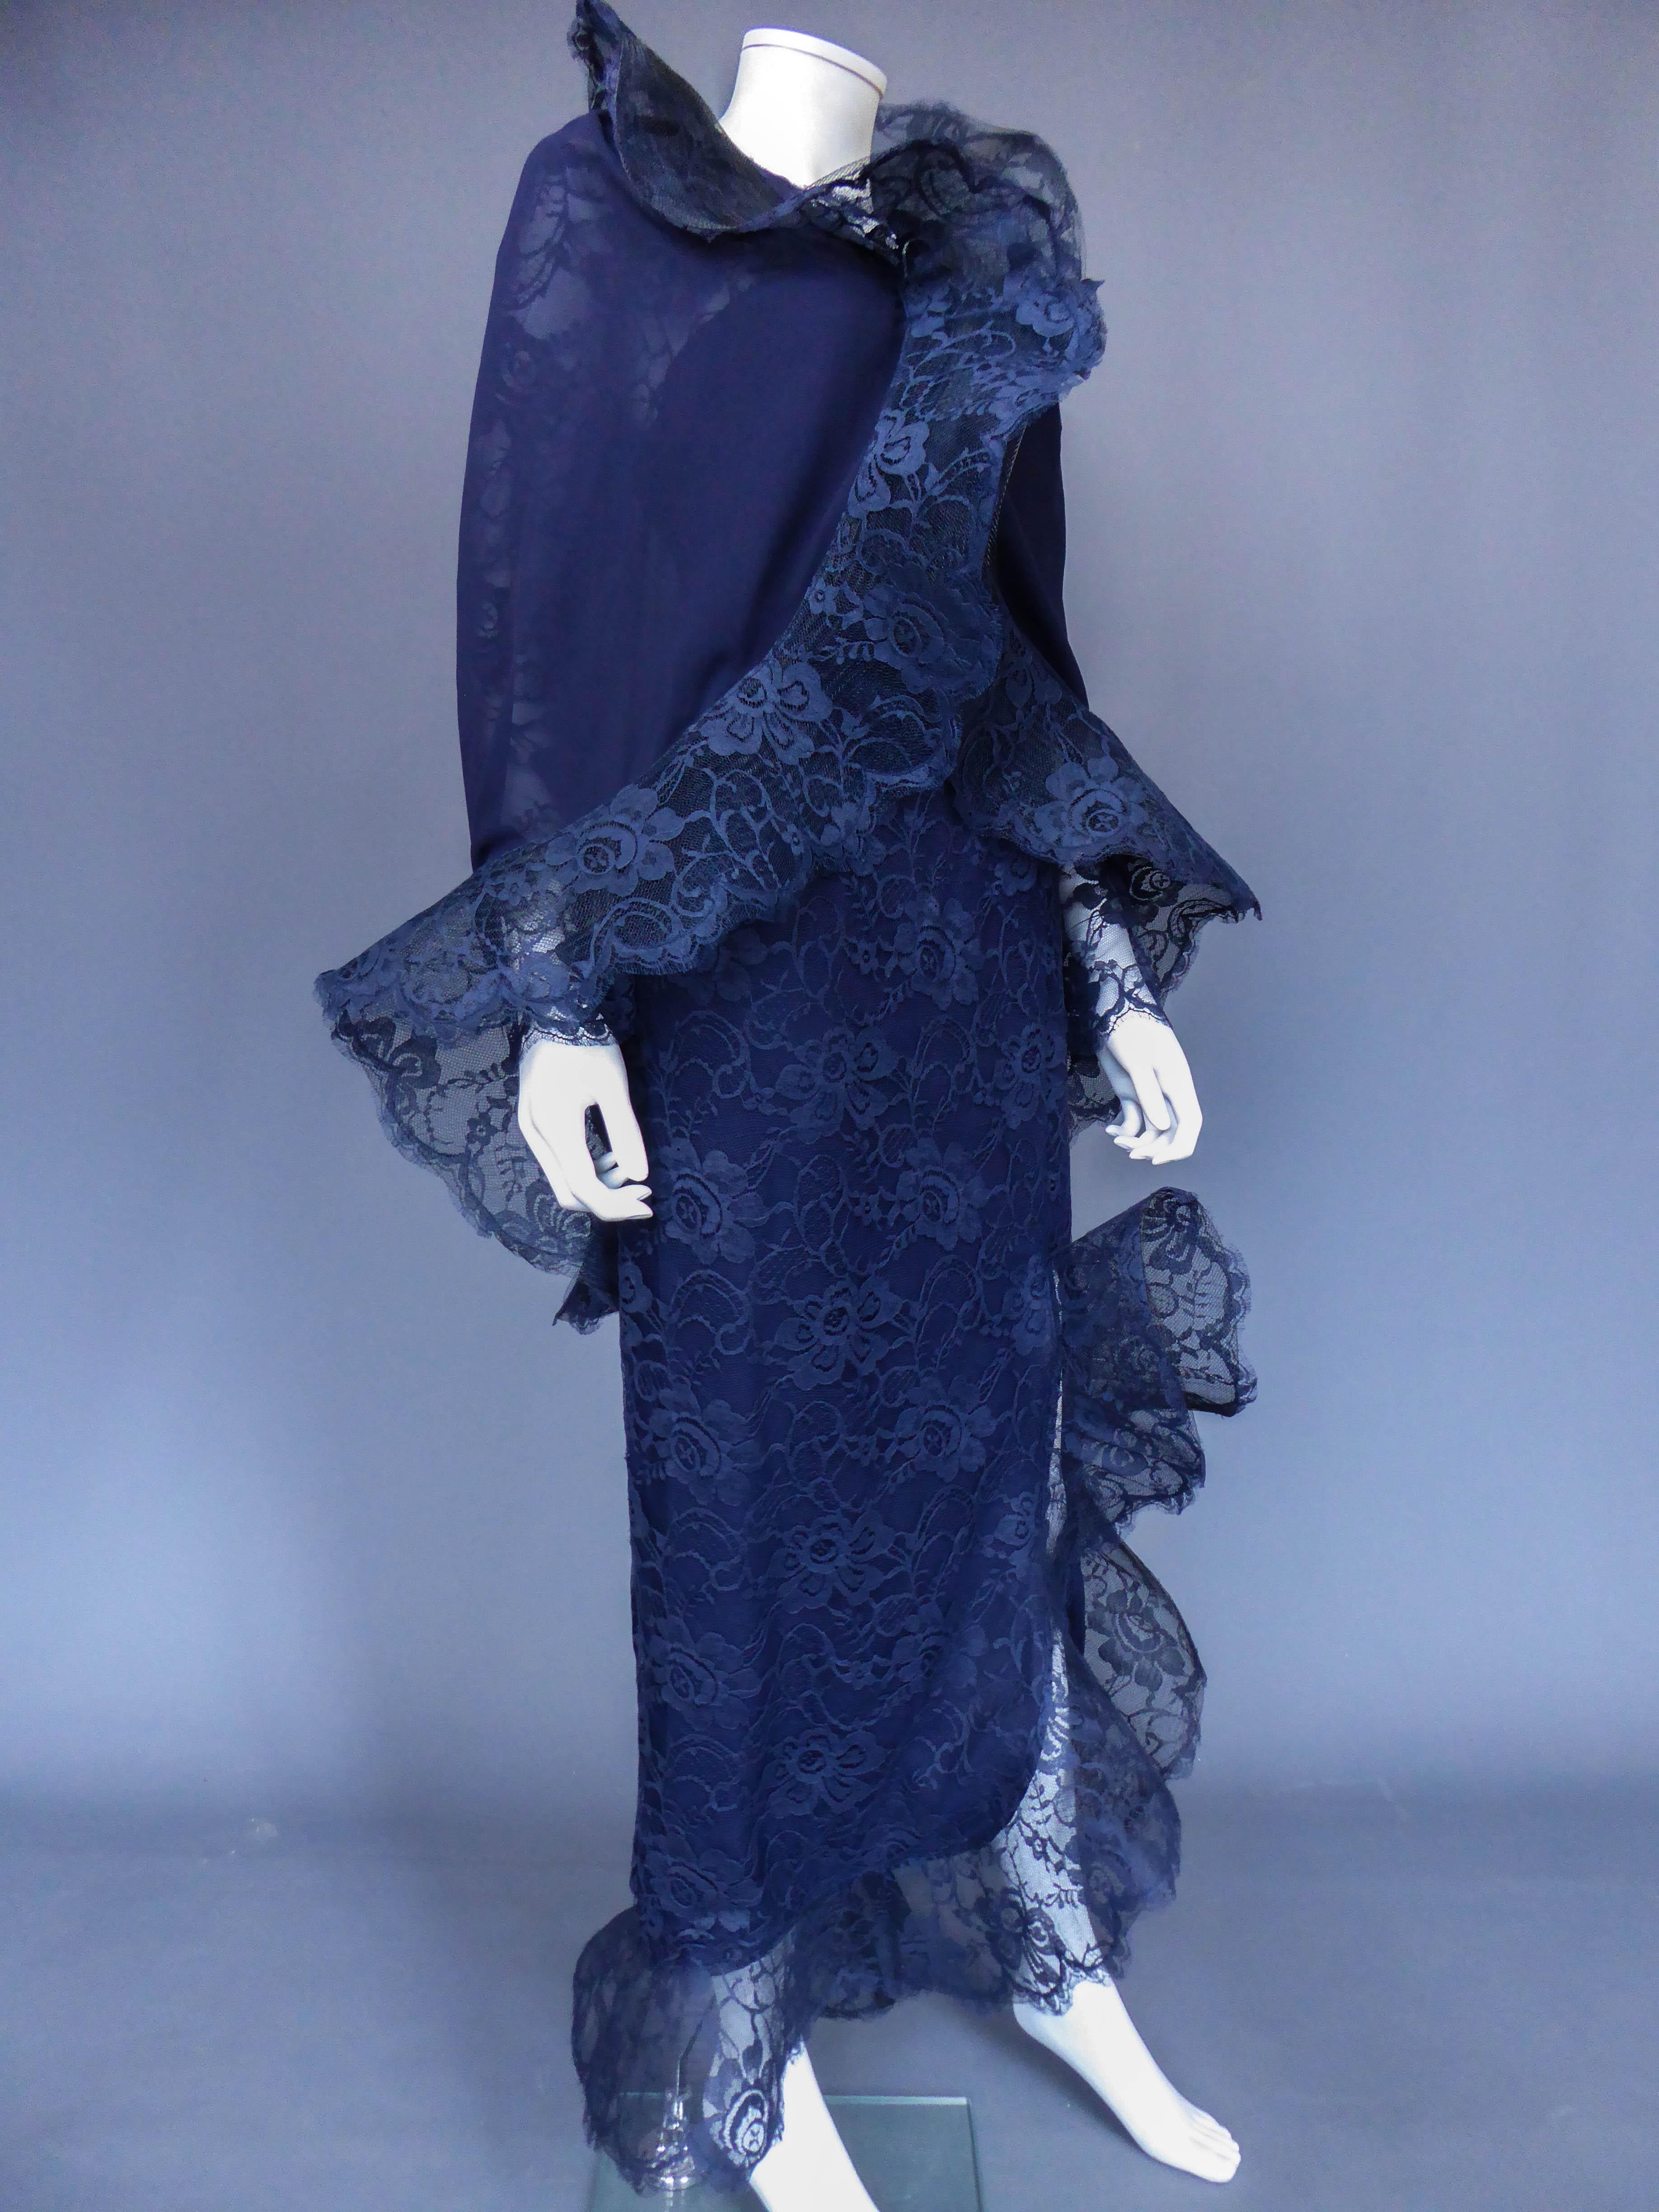 Women's Evening dress and cape attributed to Pierre Cardin Couture, Circa 1985